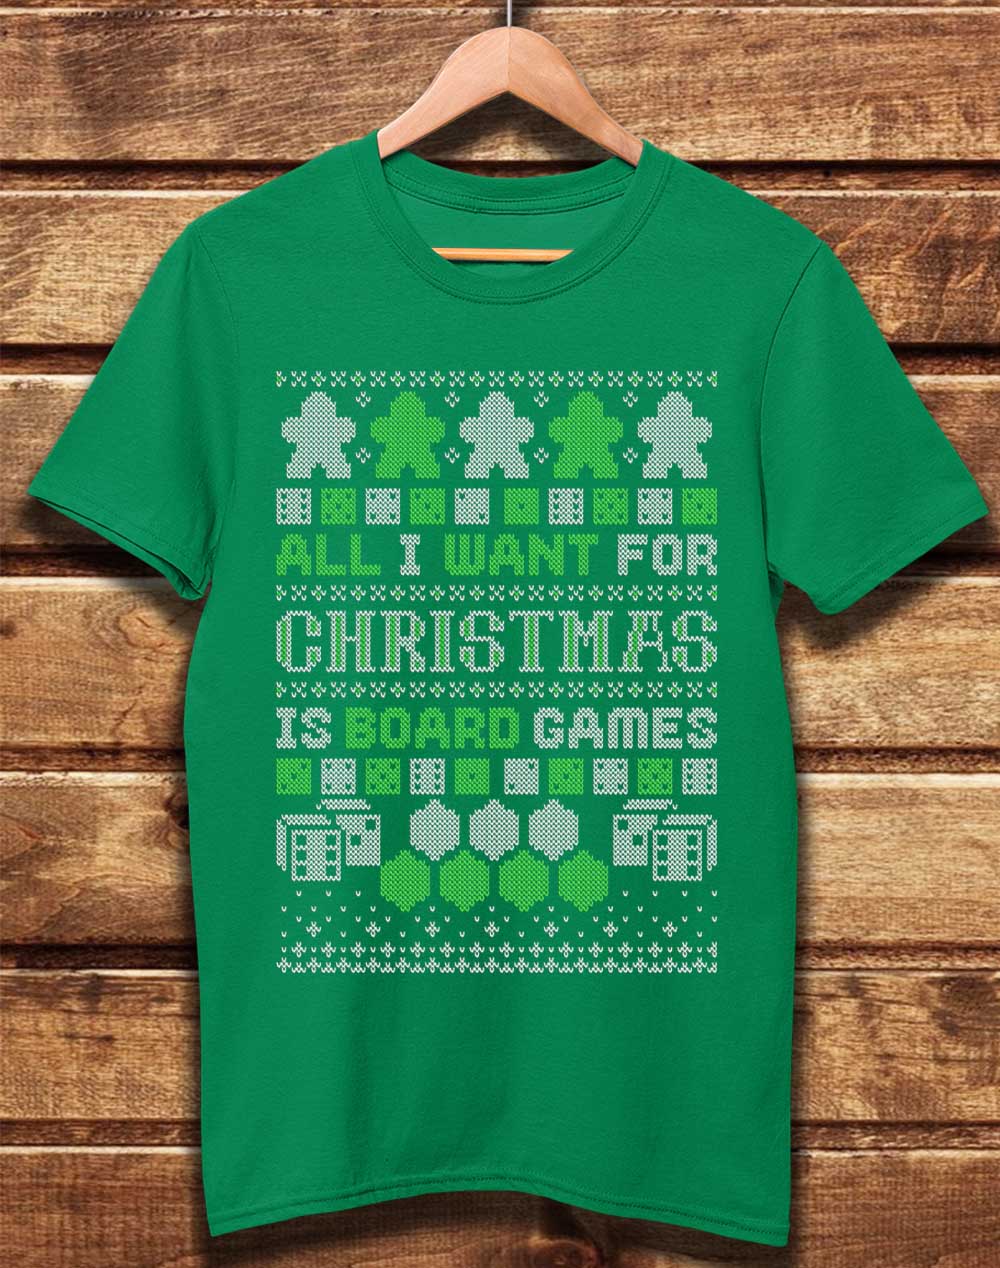 Kelly Green - DELUXE All I Want for Xmas is Board Games Organic Cotton T-Shirt